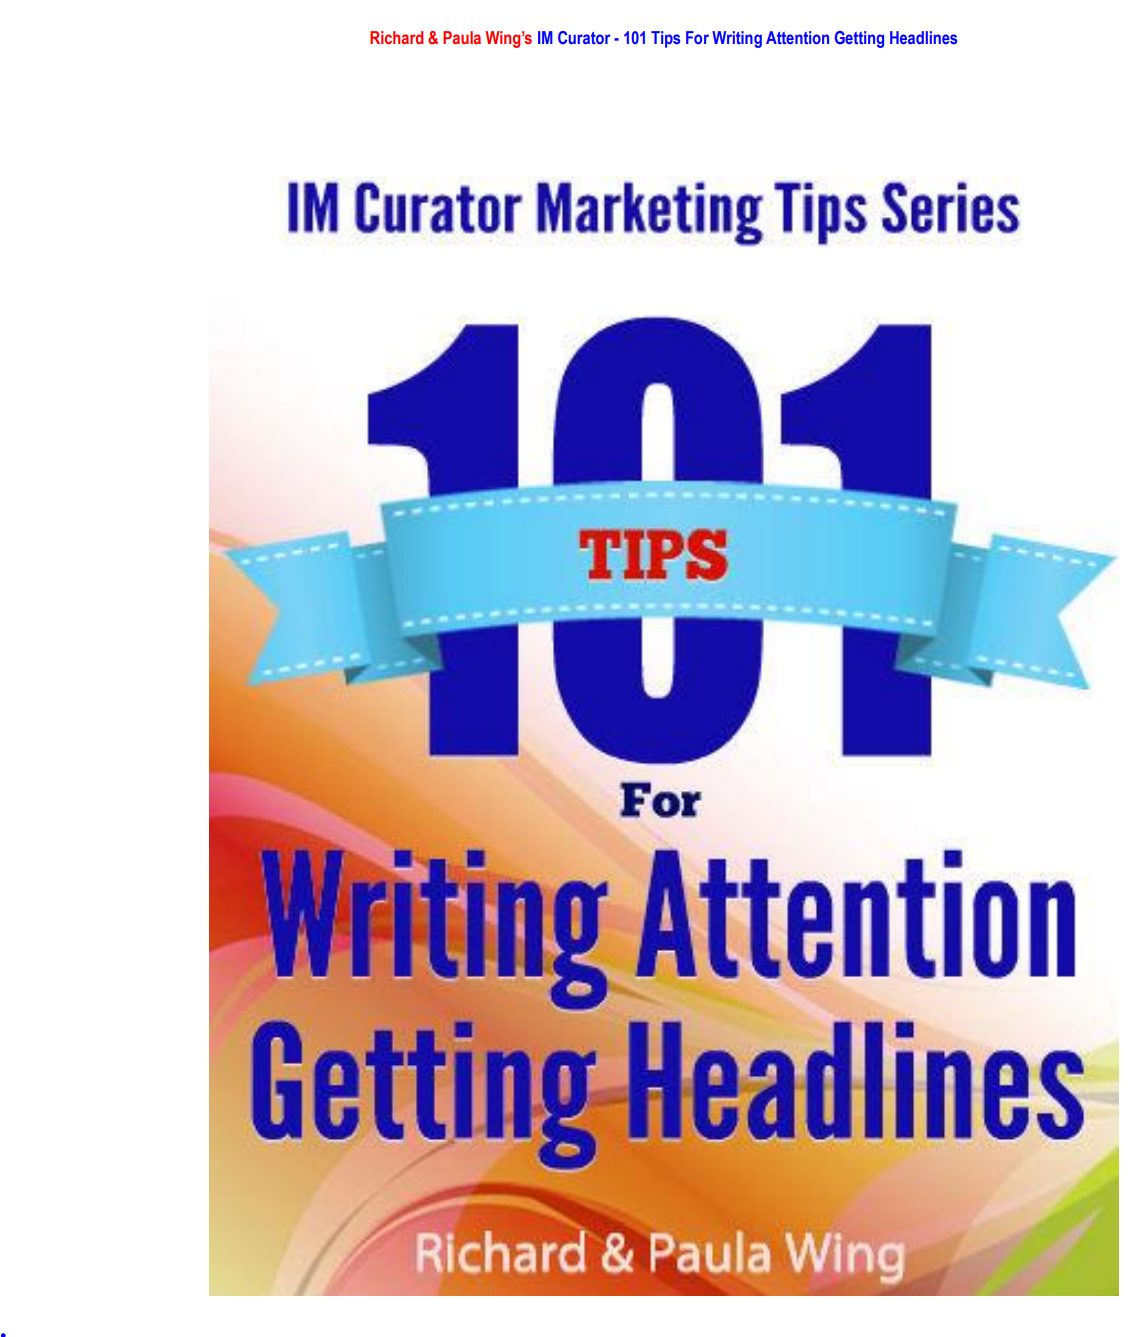 101 Tips for Writing Attention Getting Headlines